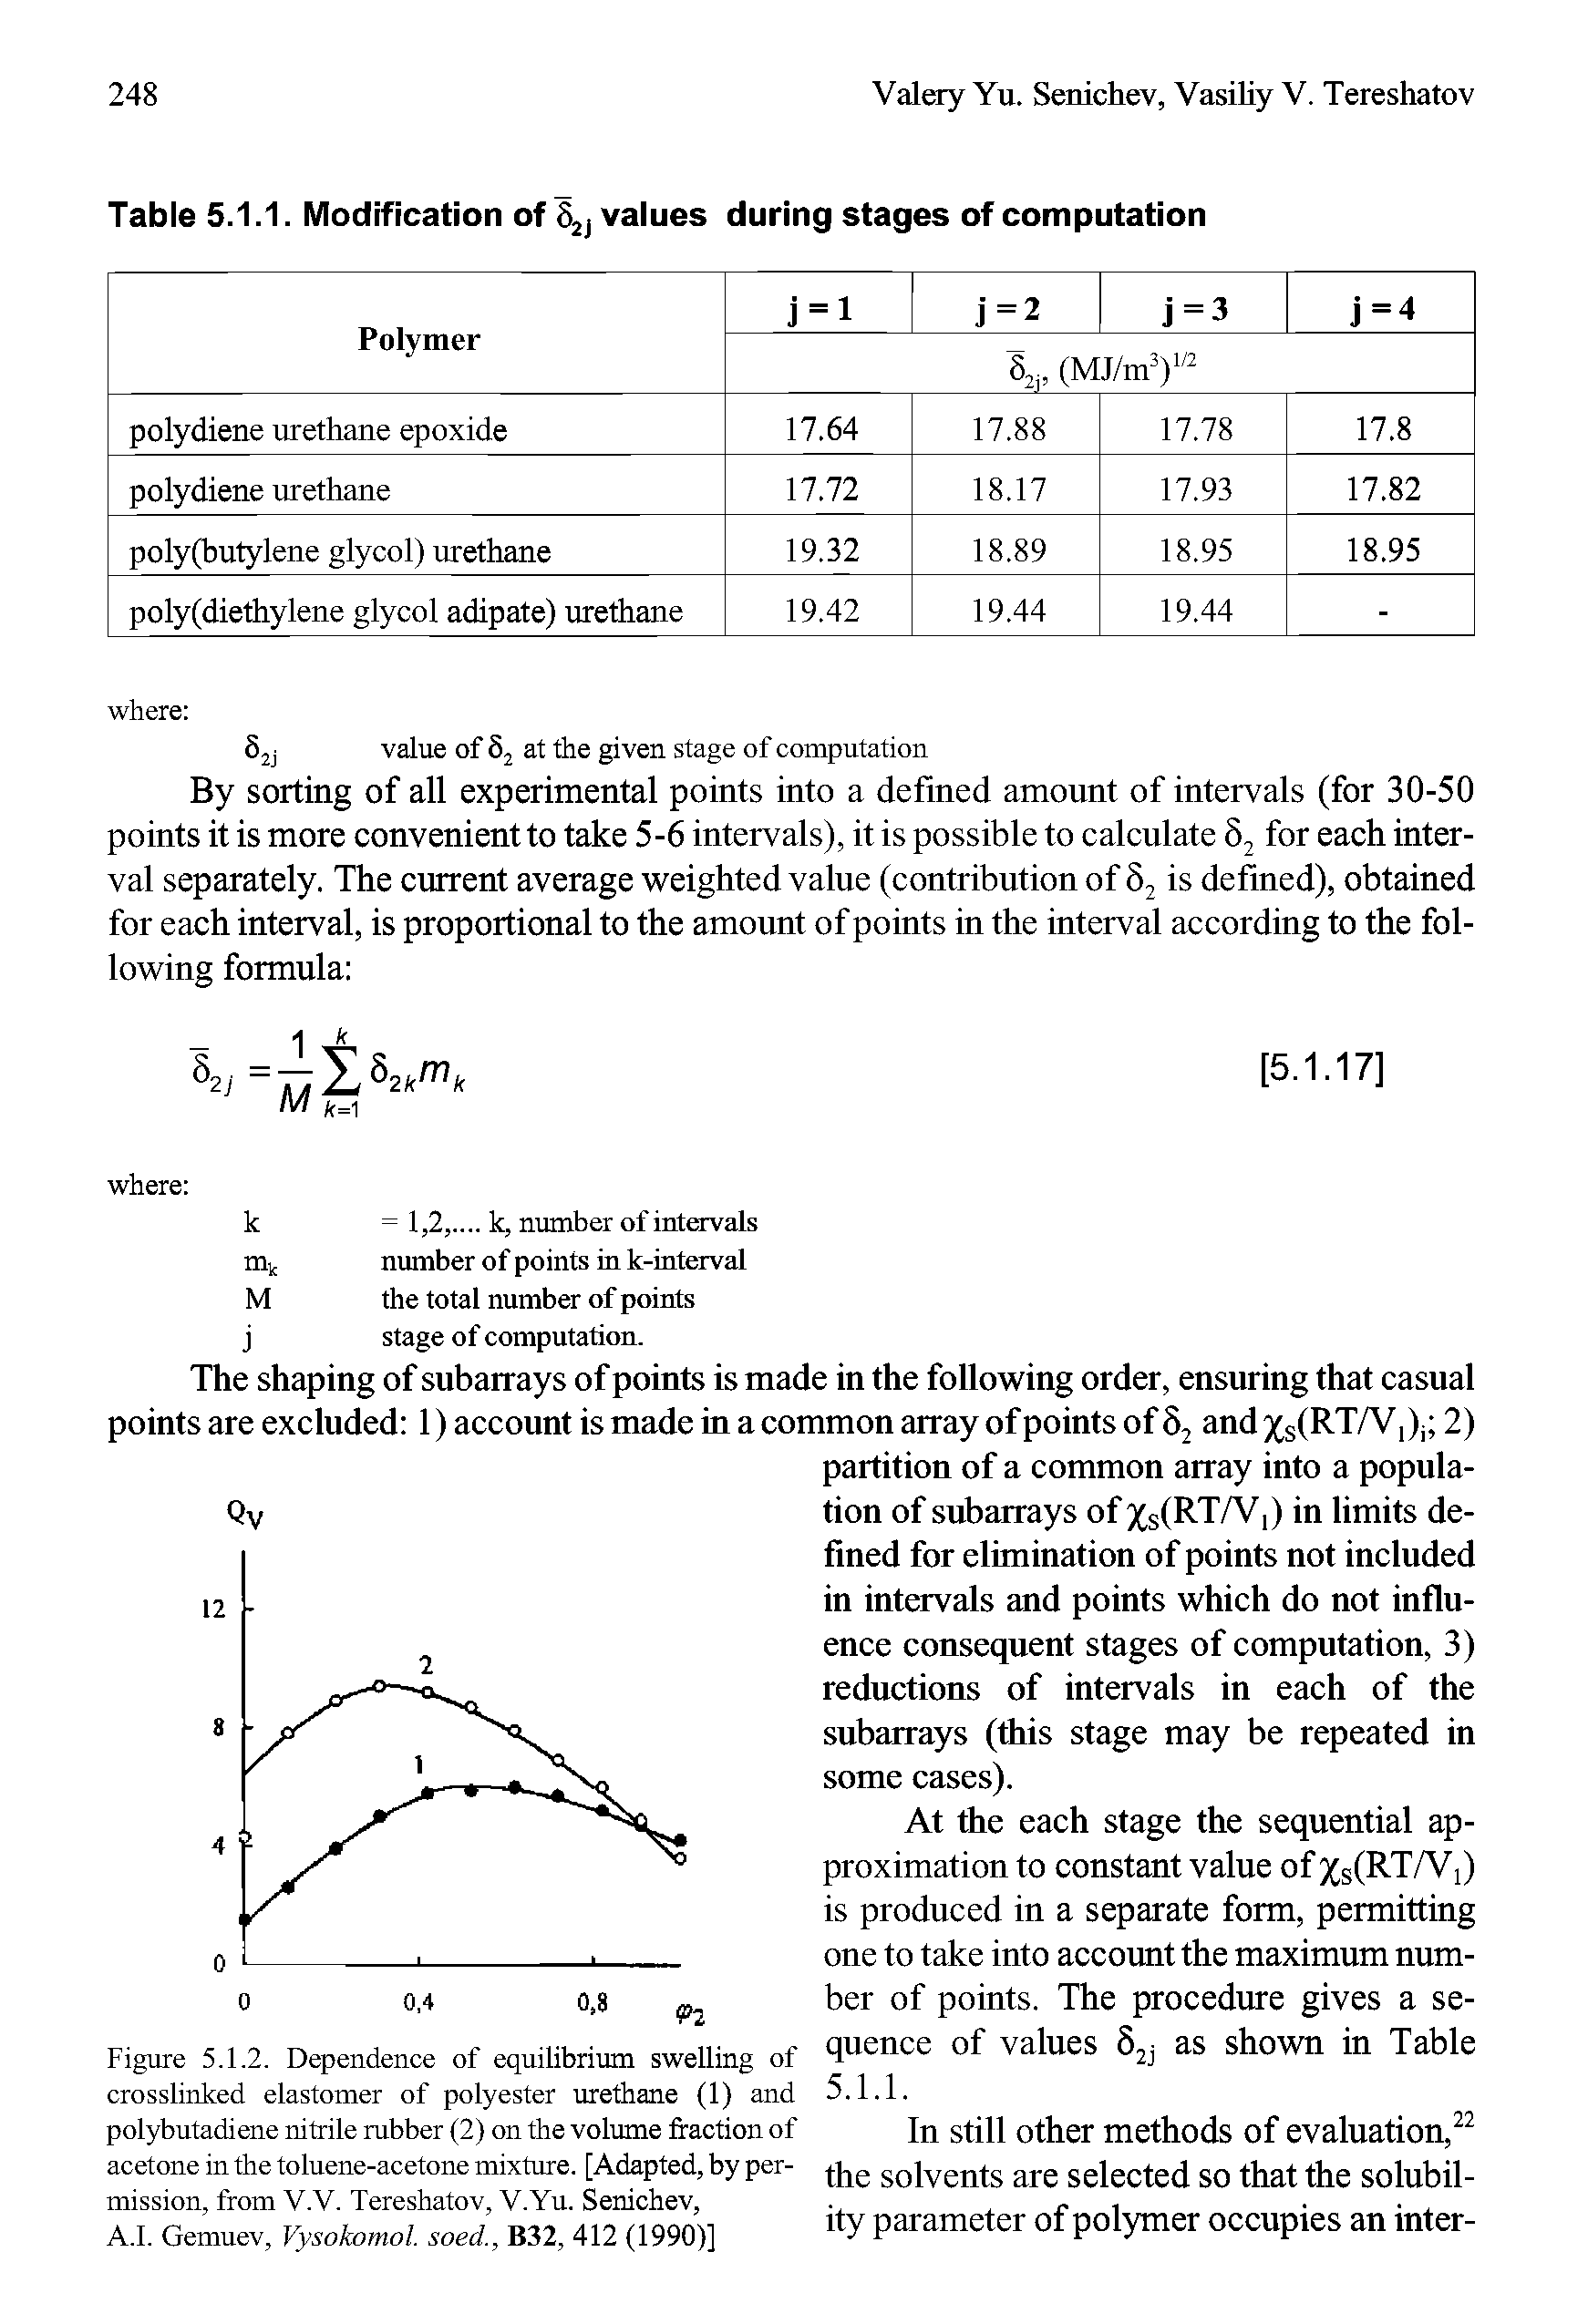 Figure 5.1.2. Dependence of equilibrium swelling of crosslinked elastomer of polyester urethane (1) and polybutadiene nitrile mbber (2) on the volume fraction of acetone in the toluene-acetone mixture. [Adapted, by permission, from V.V. Tereshatov, V.Yu. Senichev,...